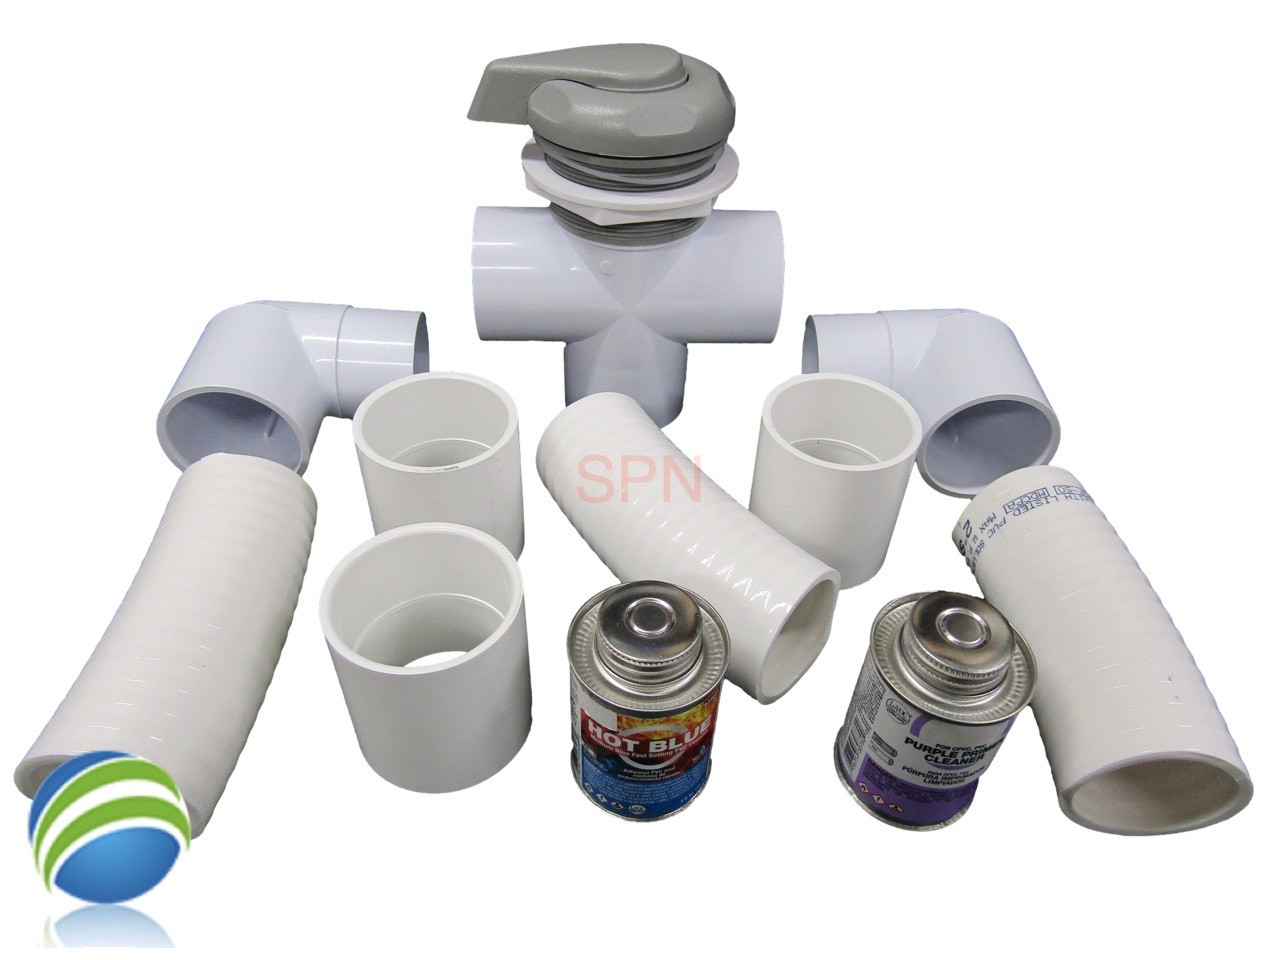 This Diverter Kit Includes the Diverter Valve, (3) 2" Couplers, (3) 6" Pieces of 2" Flex Pipe and (2) 2" Street Slip Ells and Includes 4oz of  Hot Blue Glue and 4oz of Purple Primer. These are the components need to completely change this style of Diverter valve.. Note: There are some valves that have 1 1/2" pipe on one or more of the outlet sides in these cases you would need to purchase some 2" to 1 1/2" Bushings to convert down to 1 1/2"..